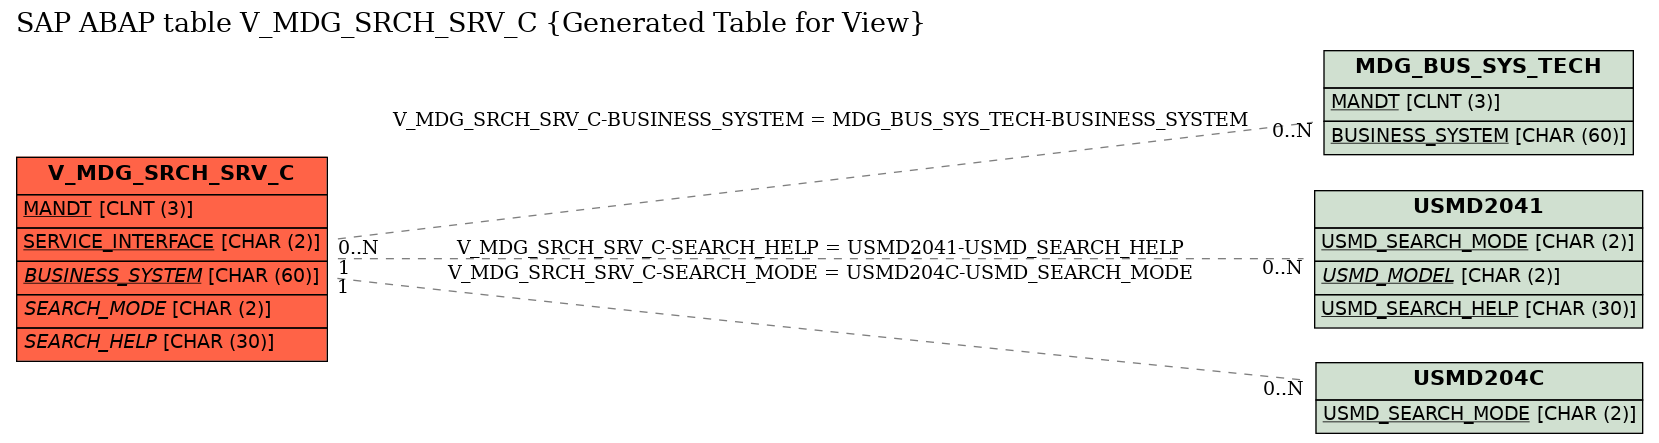 E-R Diagram for table V_MDG_SRCH_SRV_C (Generated Table for View)